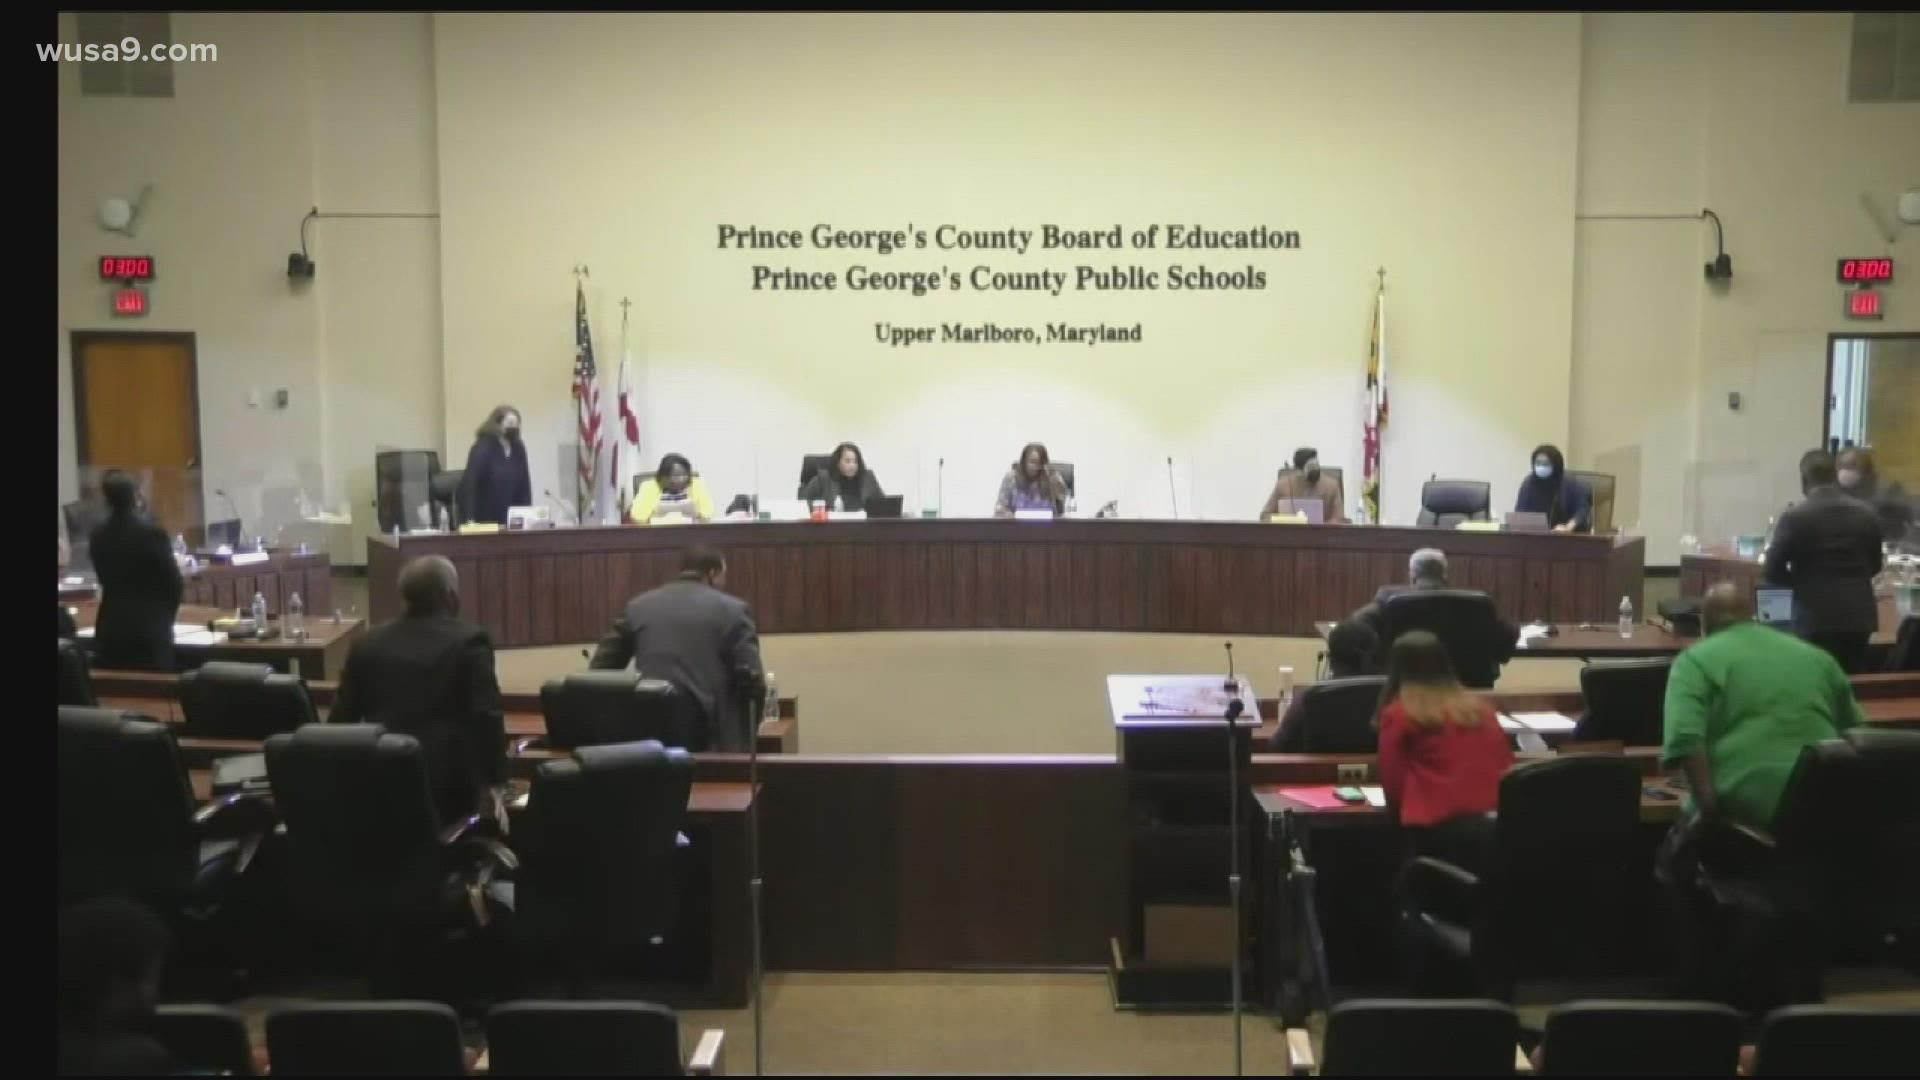 Elected board members say the ethics complaints were weaponized to target them.